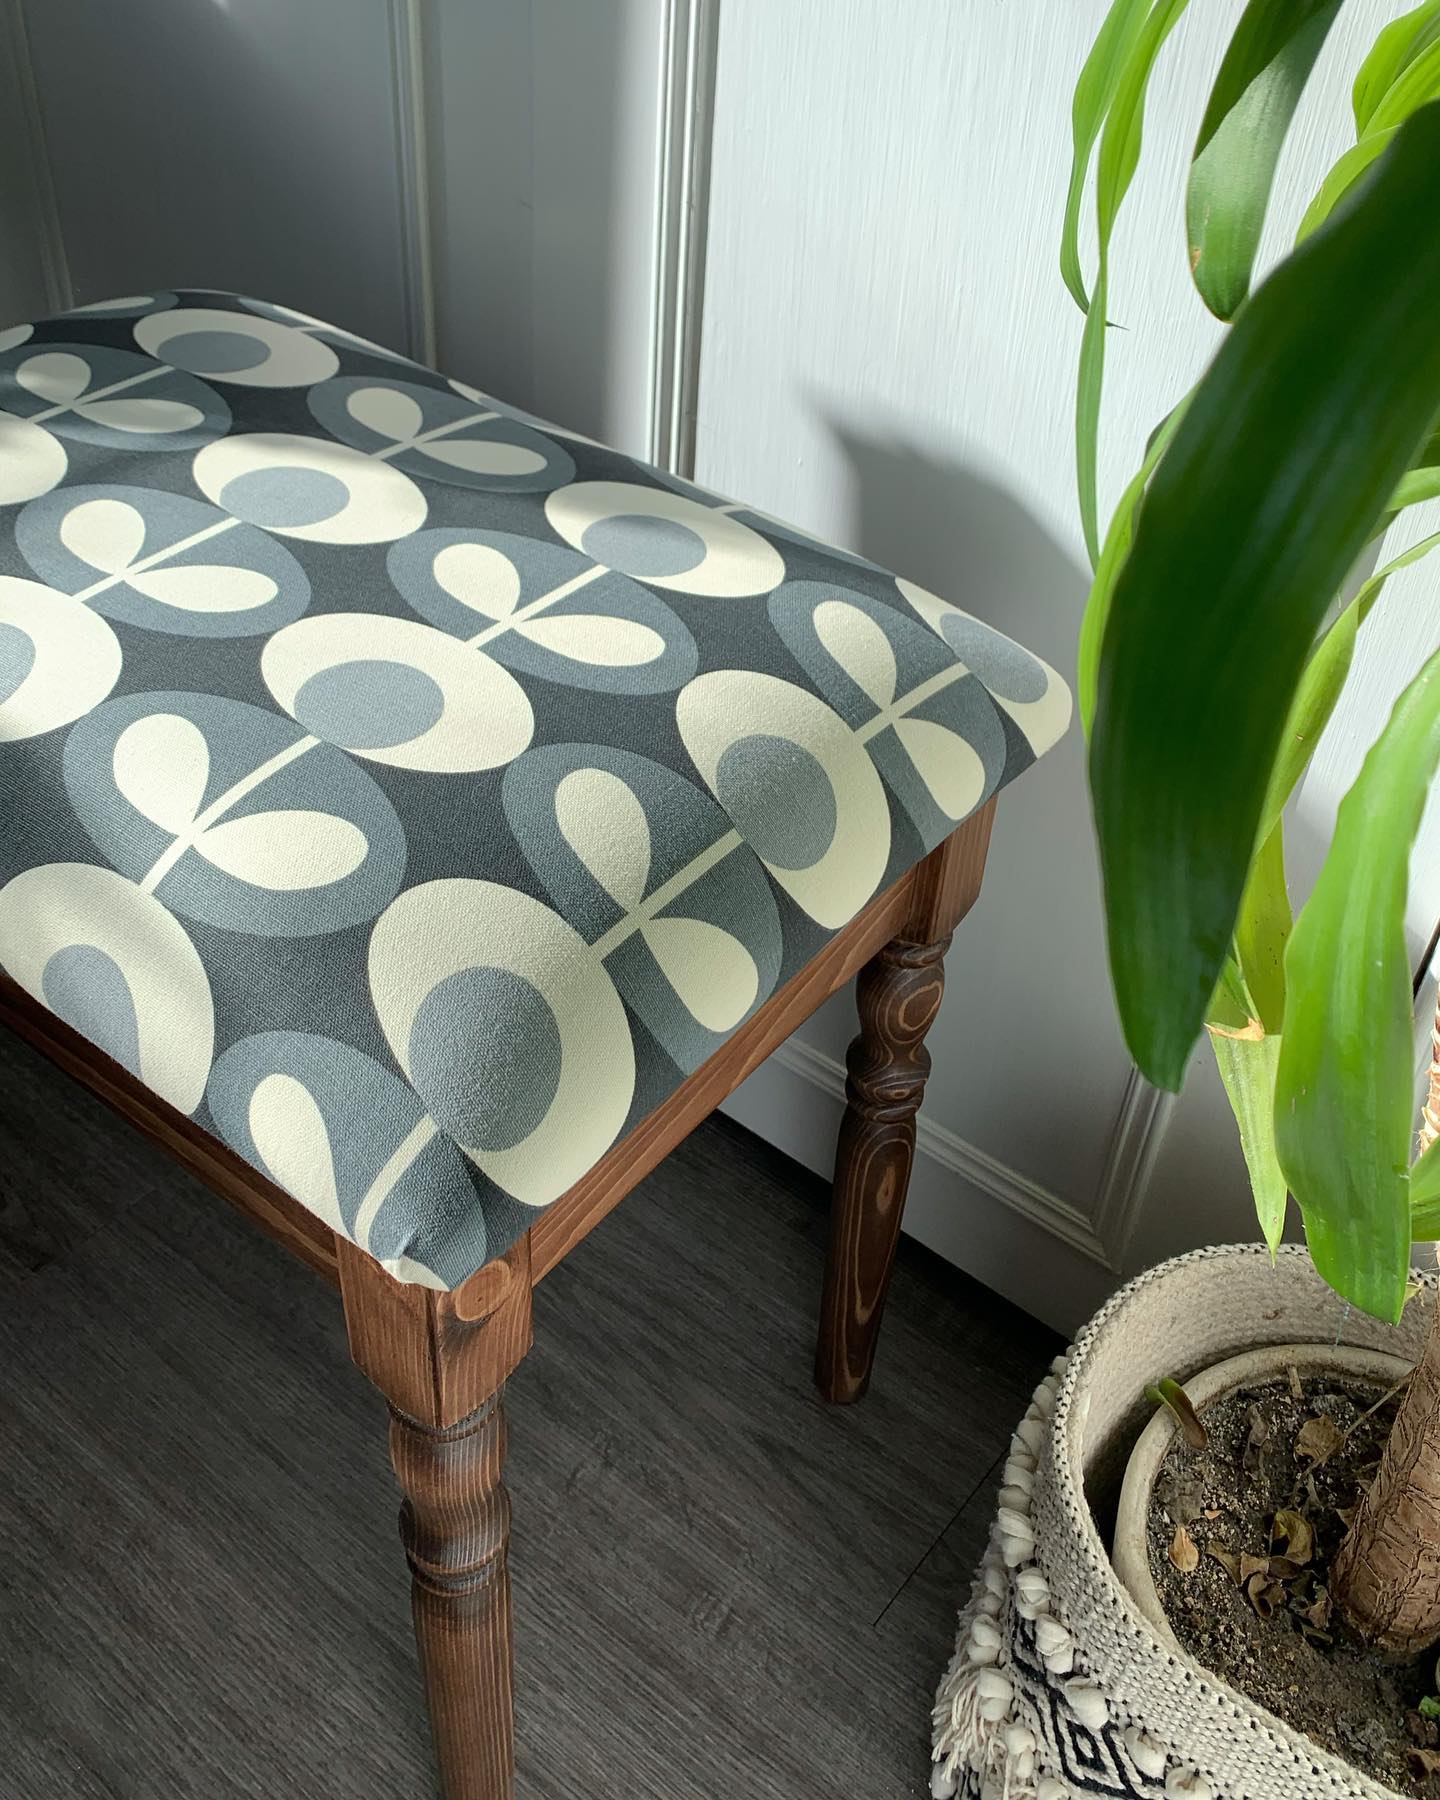 So pleased with this dressing table stool! We made it especially to match one of our ottomans as they are both going in the same room. We hope to add this product to our permanent collection so if anyone is interested in customising one, feel free to get in touch. Prices start from £79